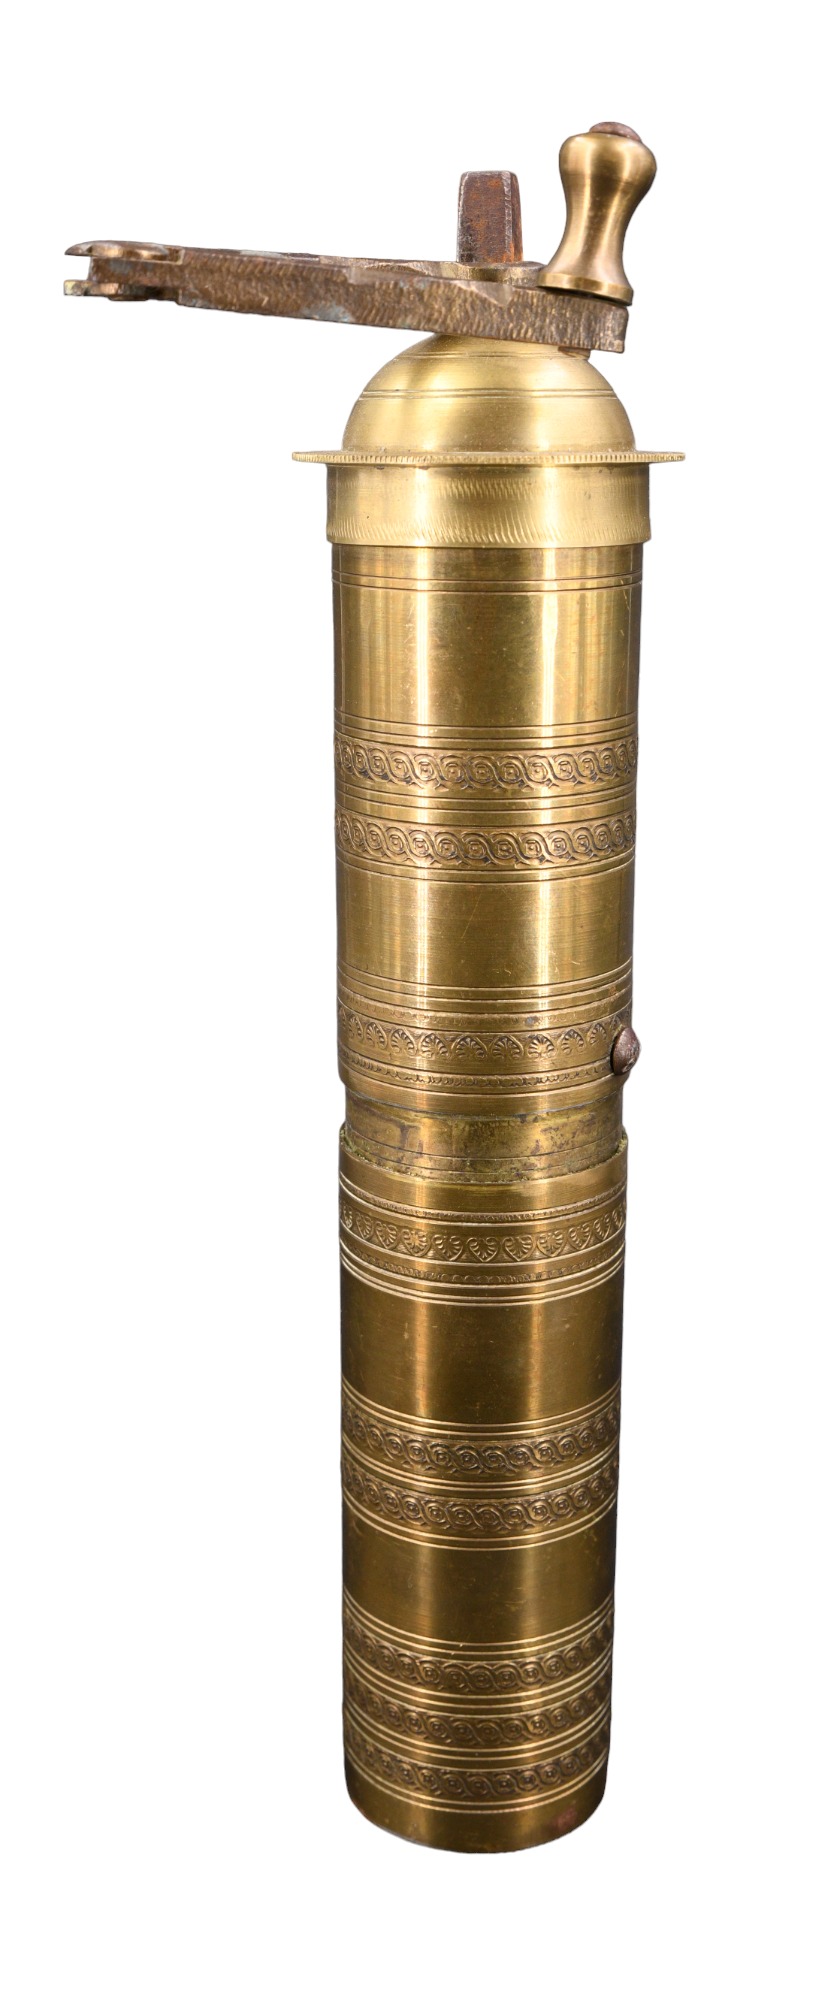 A Middle Eastern brass spice / coffee grinder, 26 cm - Image 2 of 3